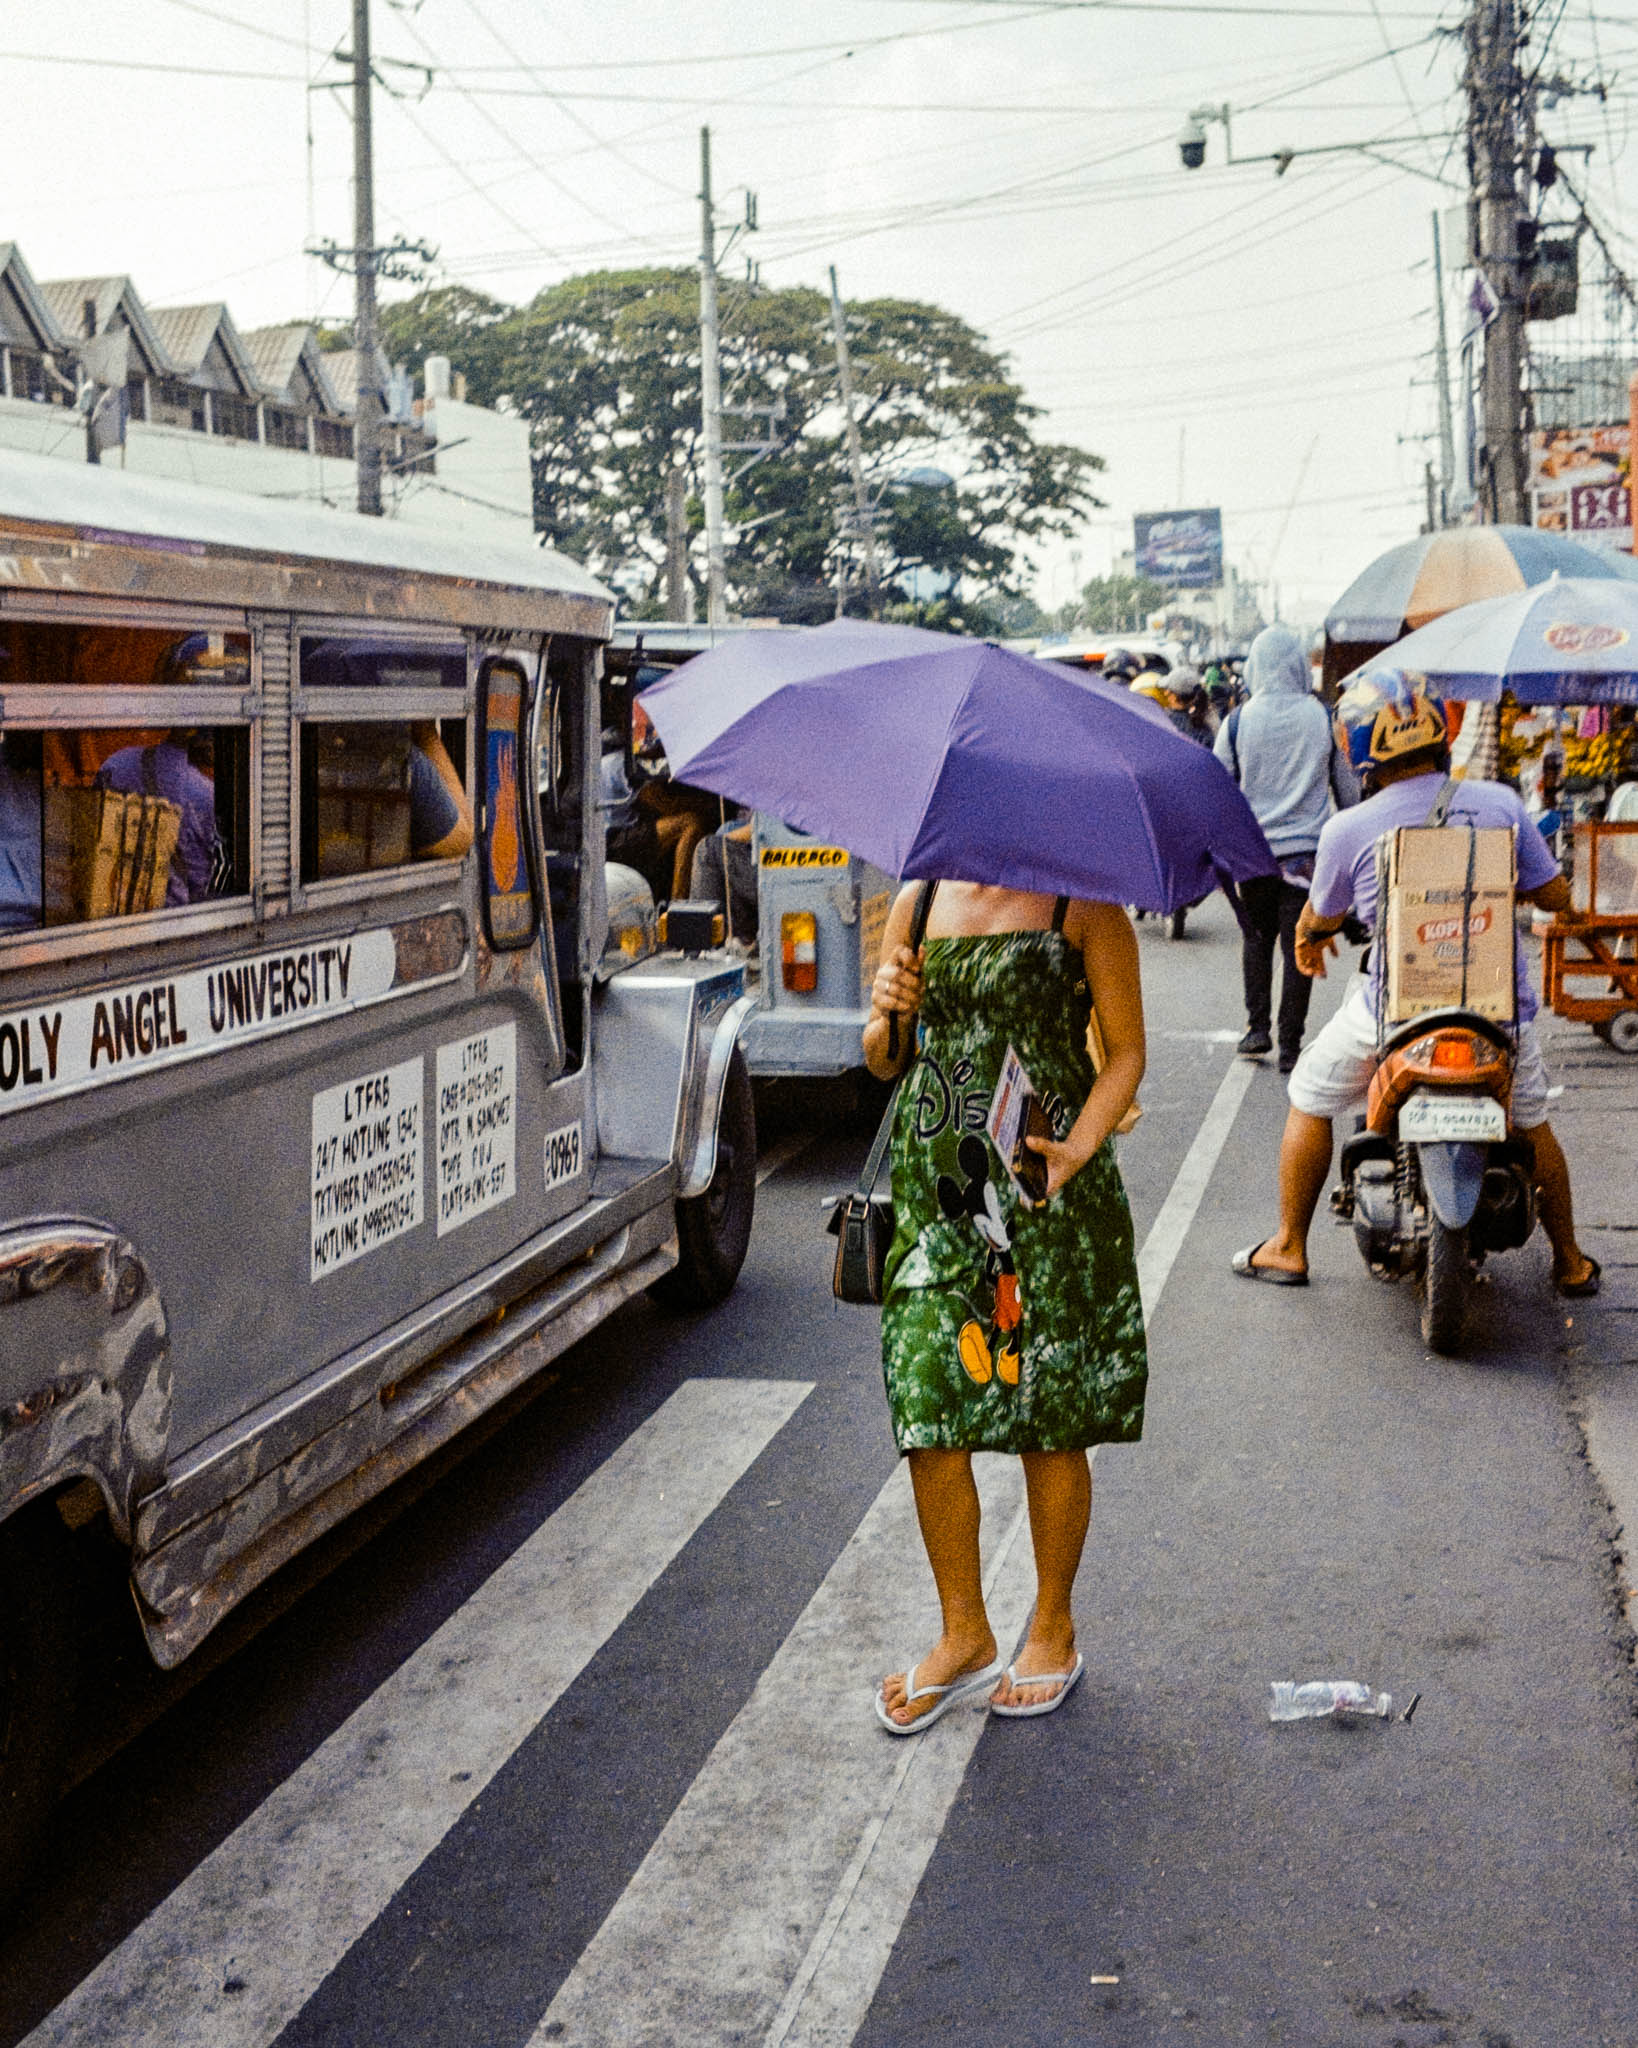 Woman with purple umbrella waiting amid bustling traffic, including a jeepney and tricycle, in the Philippines.